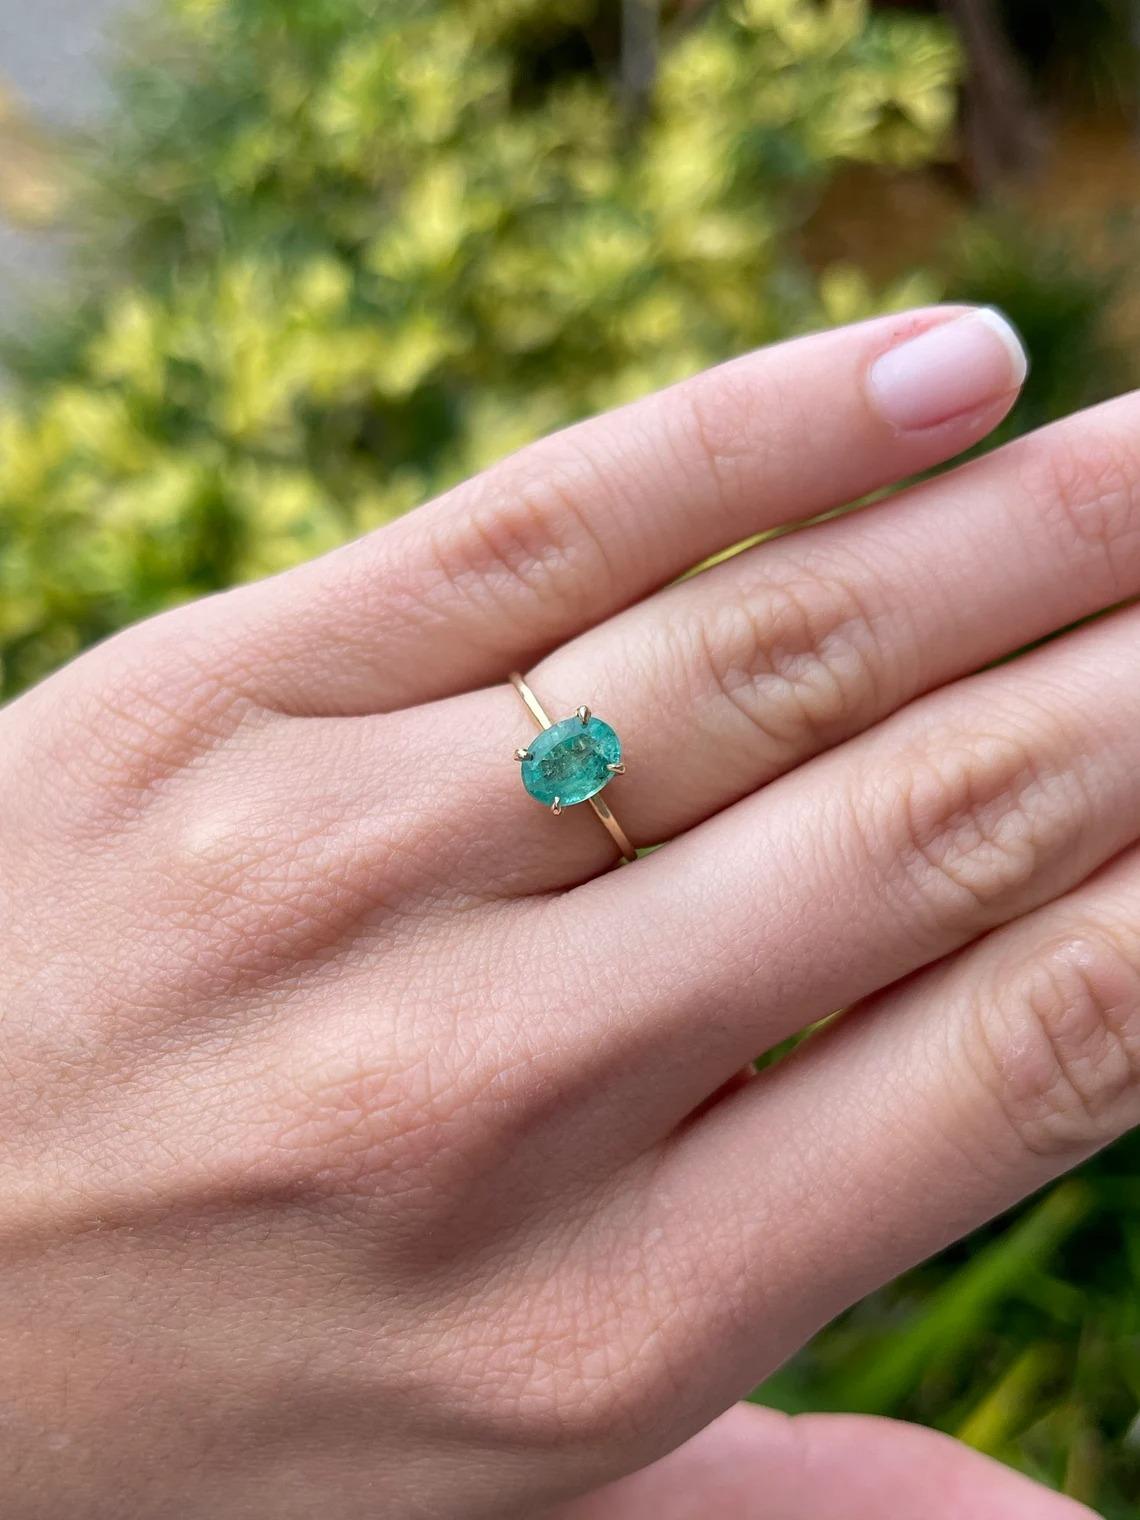 Displayed is a custom emerald solitaire oval-cut ring in 14K yellow gold. This gorgeous solitaire ring carries a 1.30-carat emerald in a prong setting. The emerald has very good clarity with minor flaws that are normal in all genuine emeralds. The